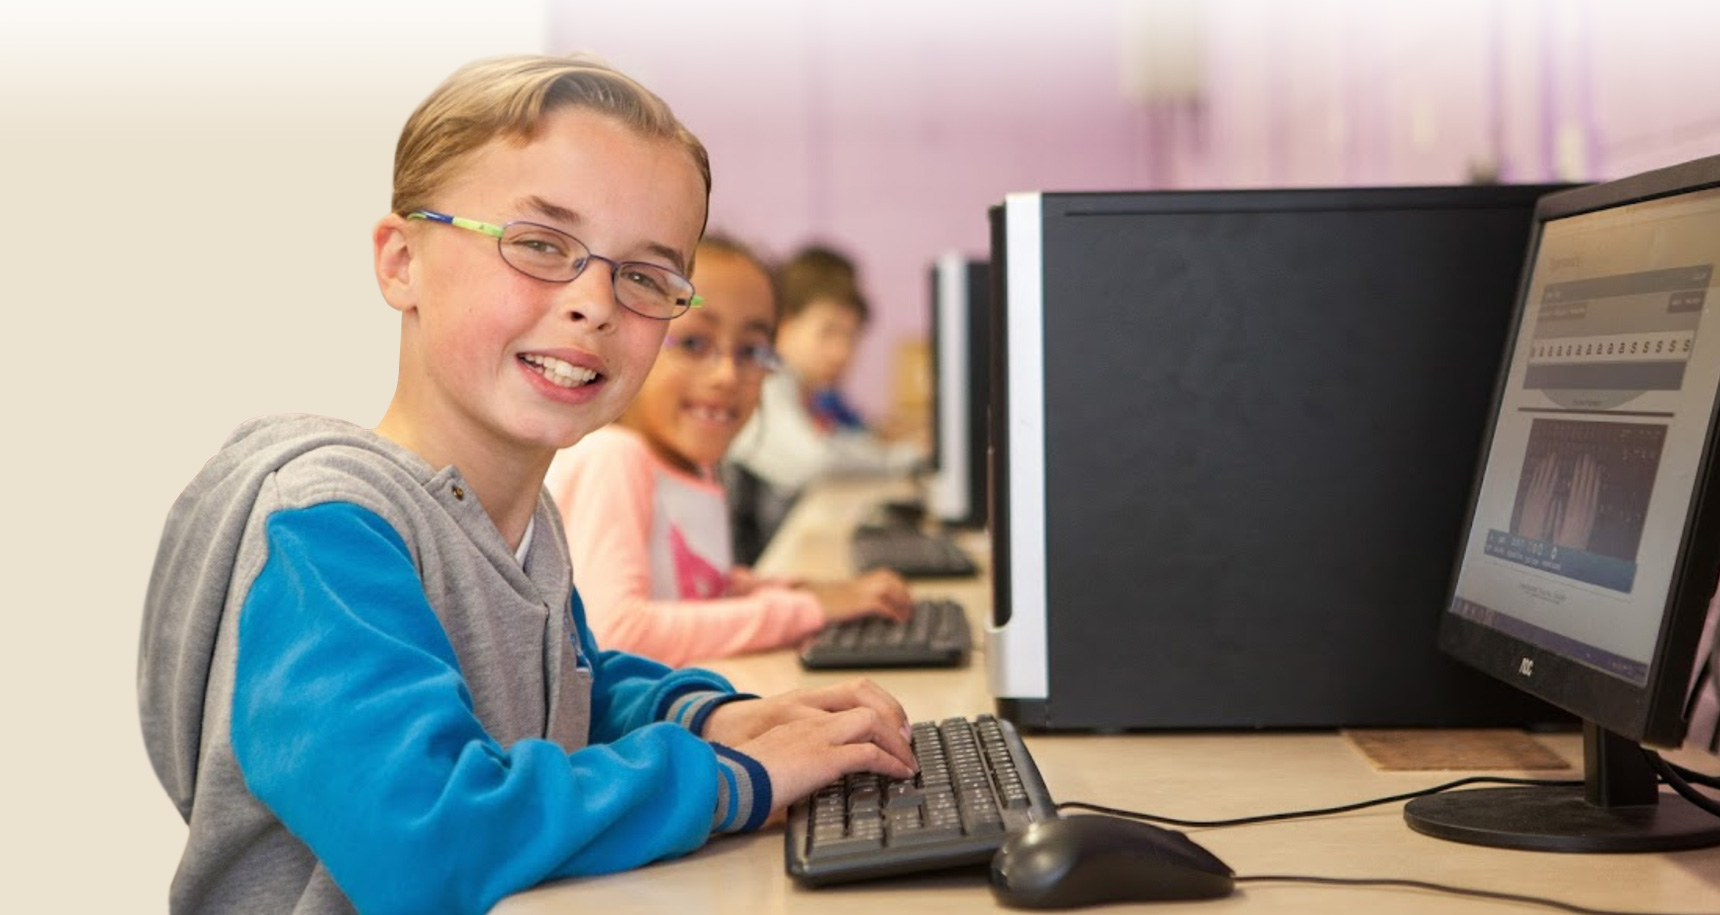 Searsol computer classroom based camps now available to book over the month of July 2021 in Dublin – Artane, Dundrum and Lucan.